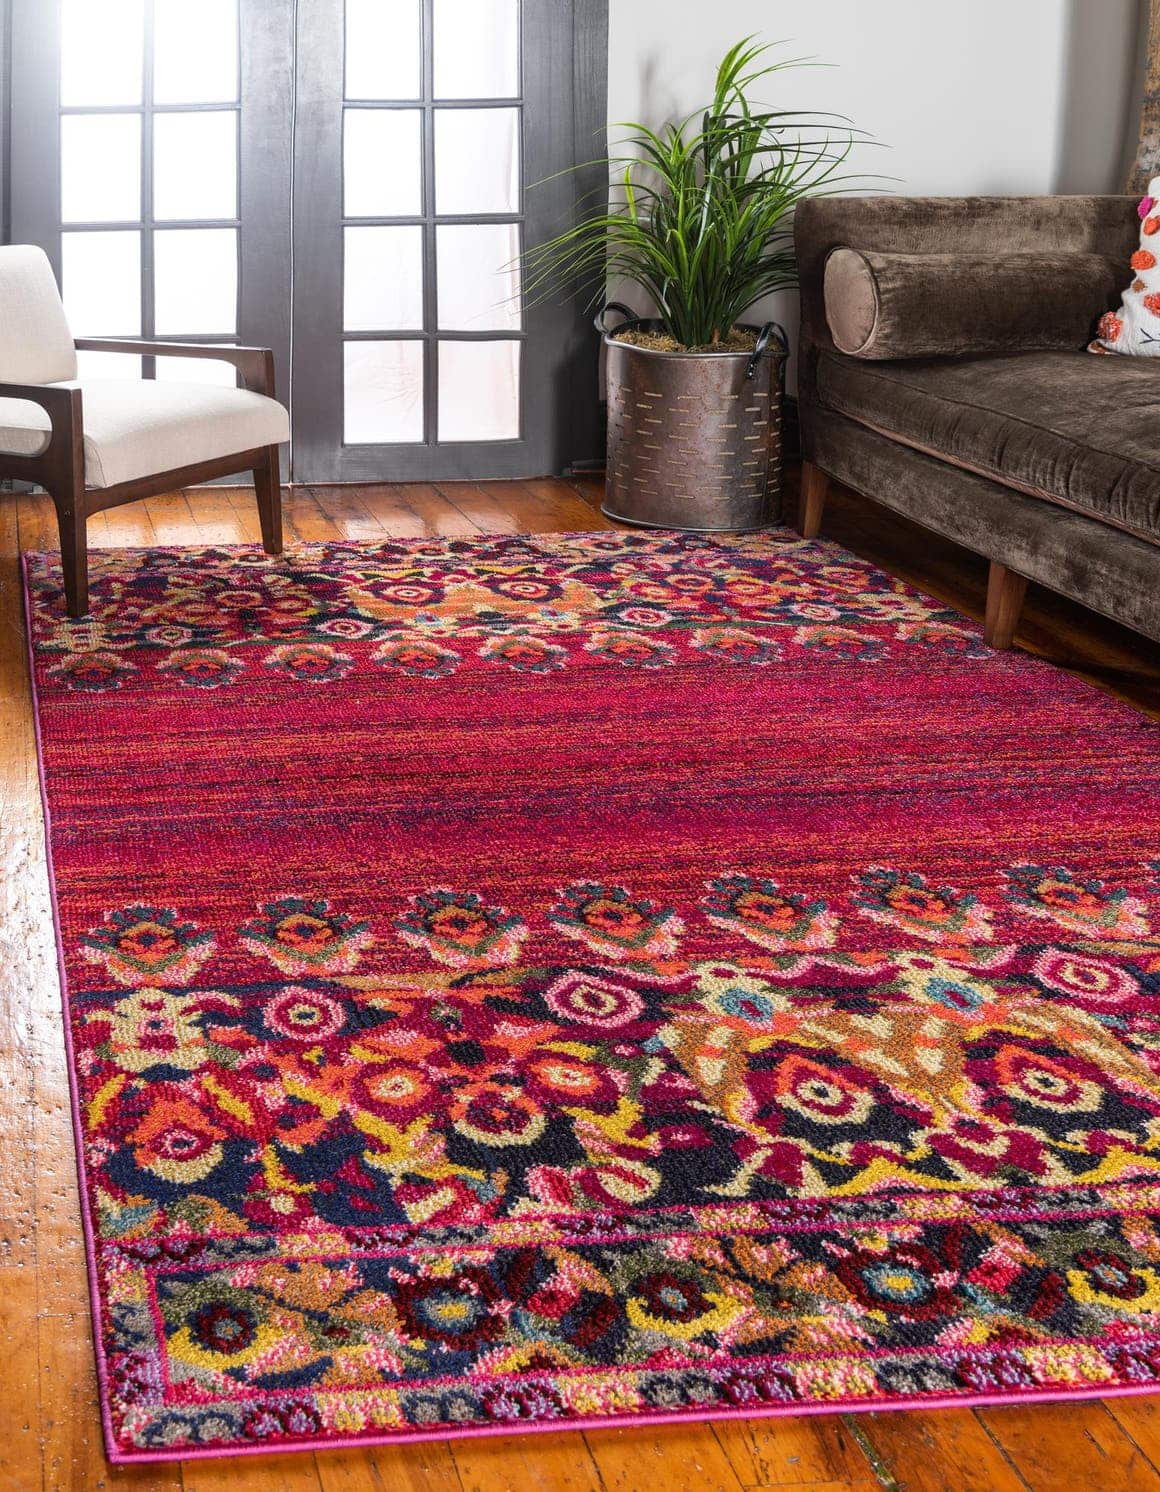 25 Gorgeous Rugs That Go With Brown Couches, Red And Brown Rugs